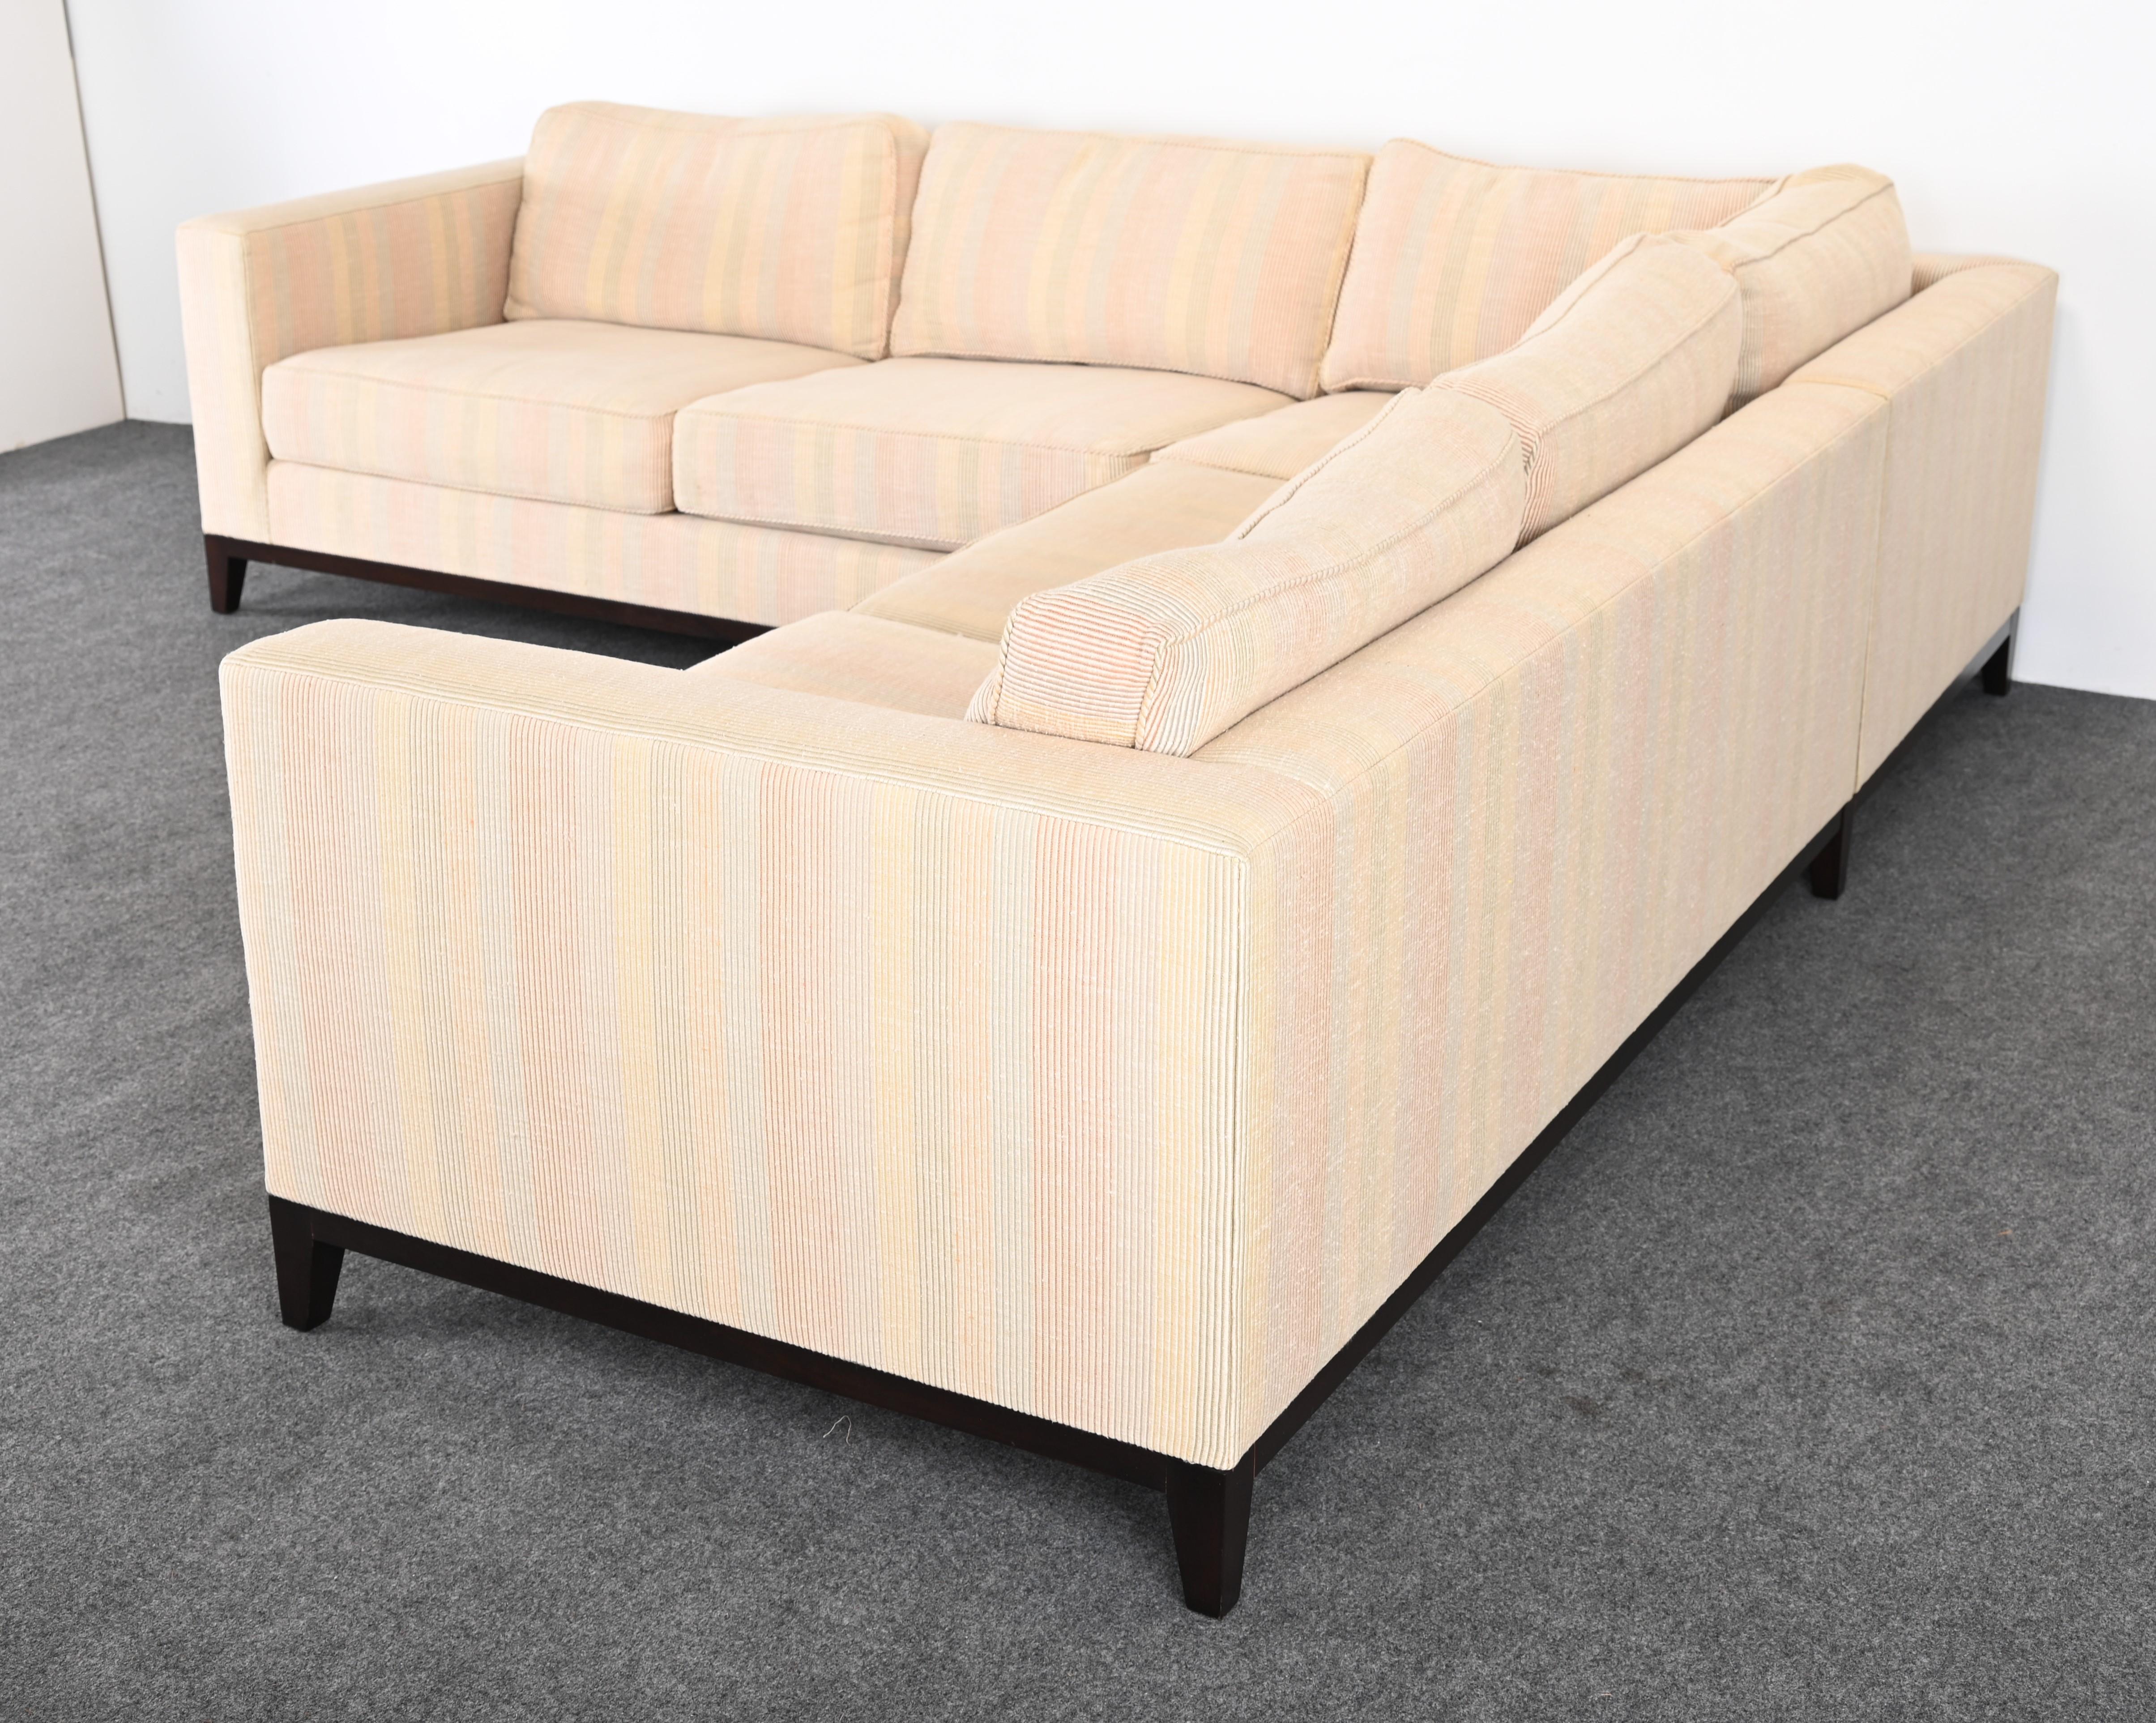 Contemporary Designer Sectional Sofa by Christian Liaigre at Holly Hunt, 21st Century